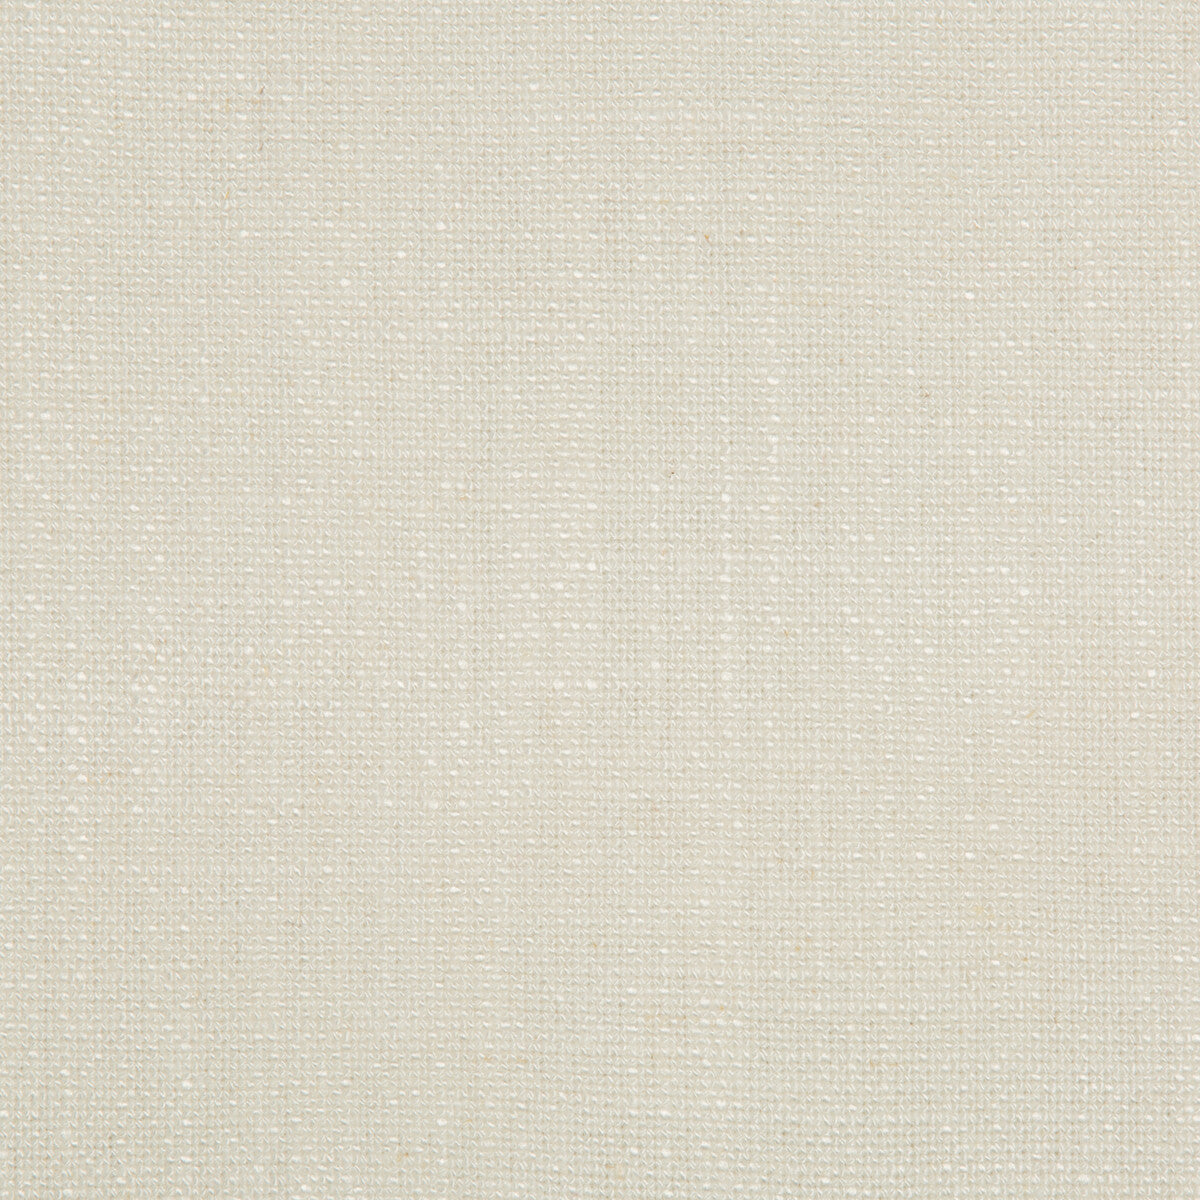 Andelle Plain fabric in ivory color - pattern 8017158.1.0 - by Brunschwig &amp; Fils